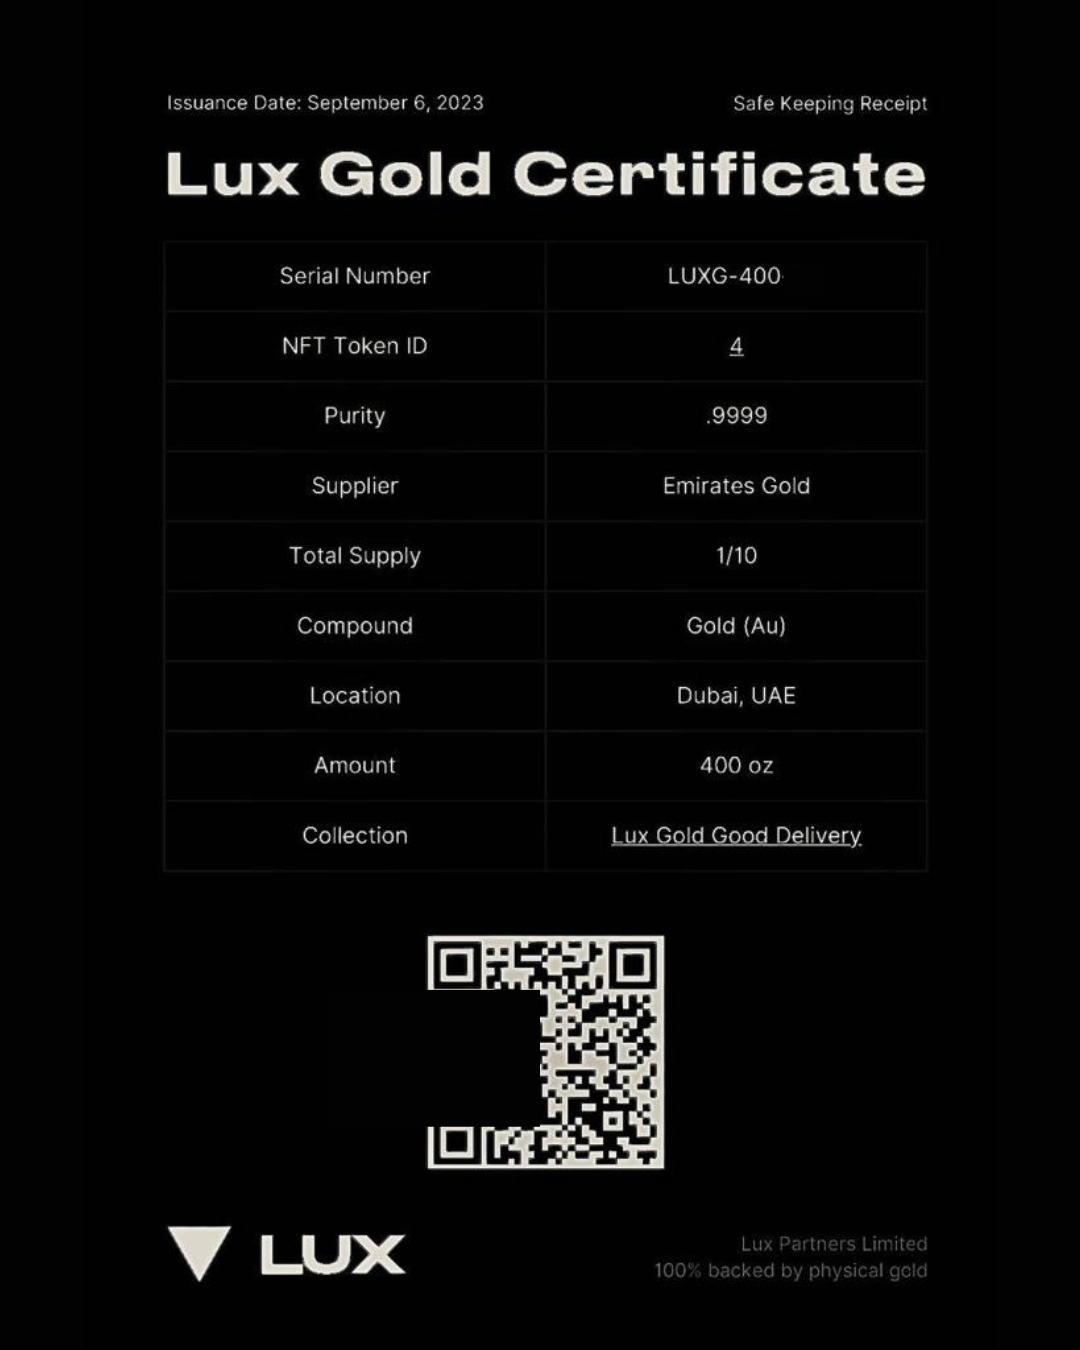 a lux gold certificate with a qr code on it